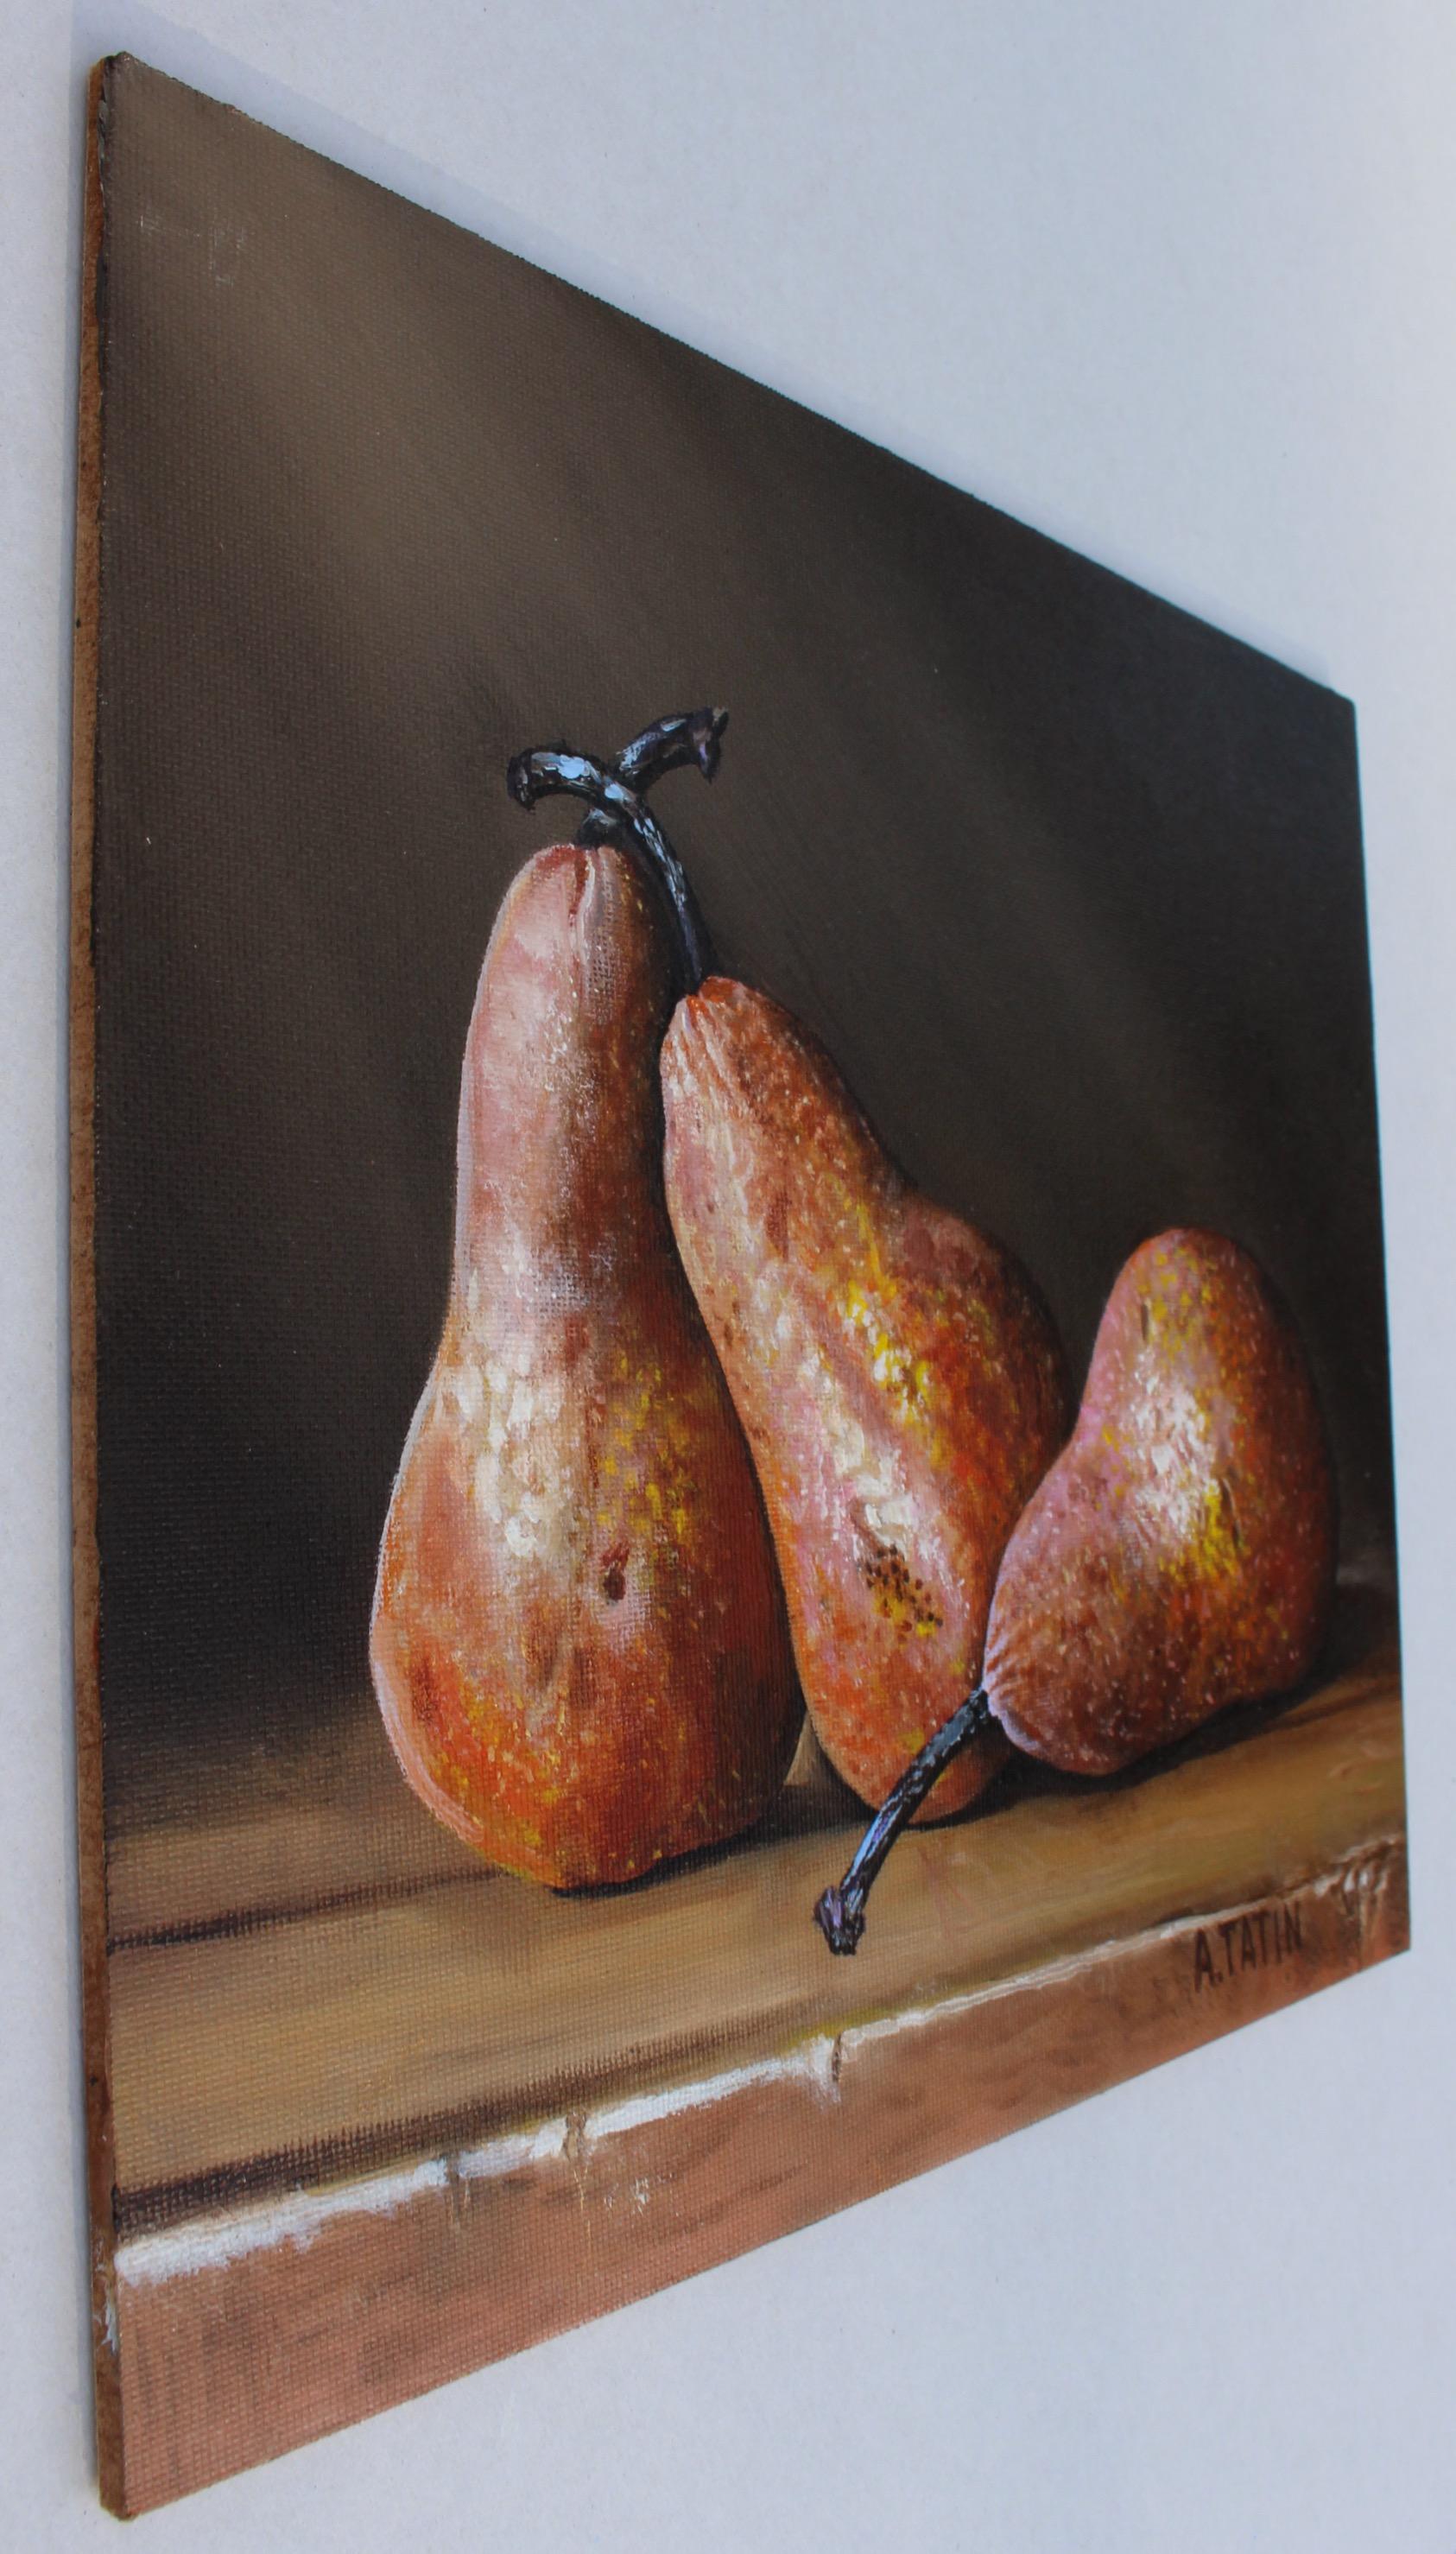 <p>Artist Comments<br>This still-life painting depicts three Bosc pears against a dark background. Their placement demonstrates a sense of balance in form and space. The interplay of light and shadow highlights the three-dimensional quality of the